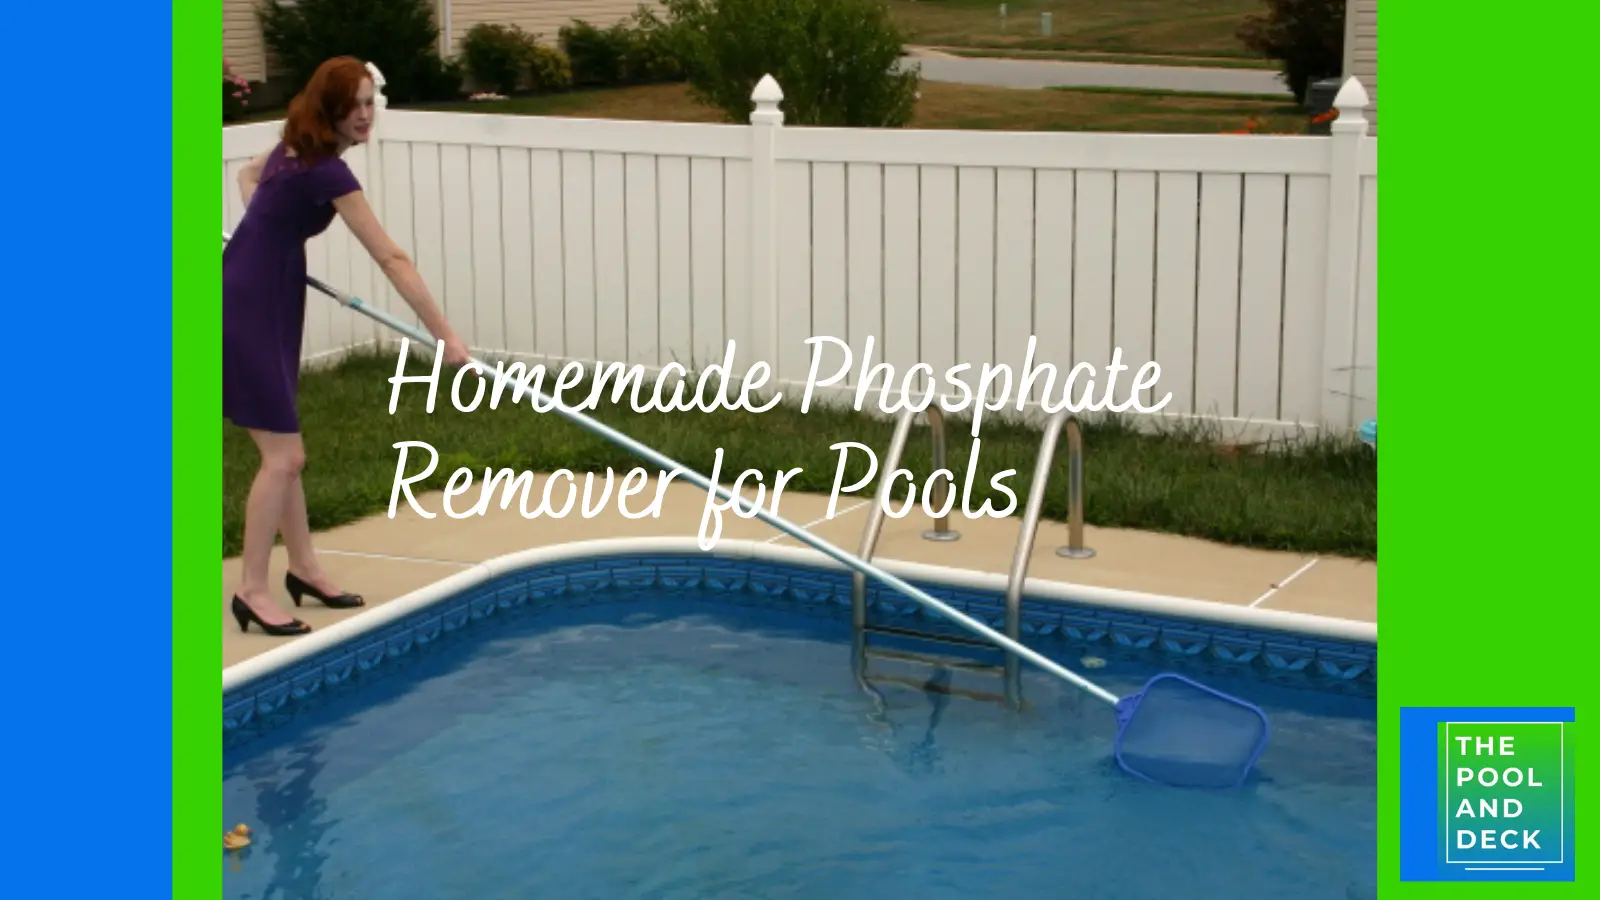 Best Homemade Phosphate Remover for Pools (The Truth!)